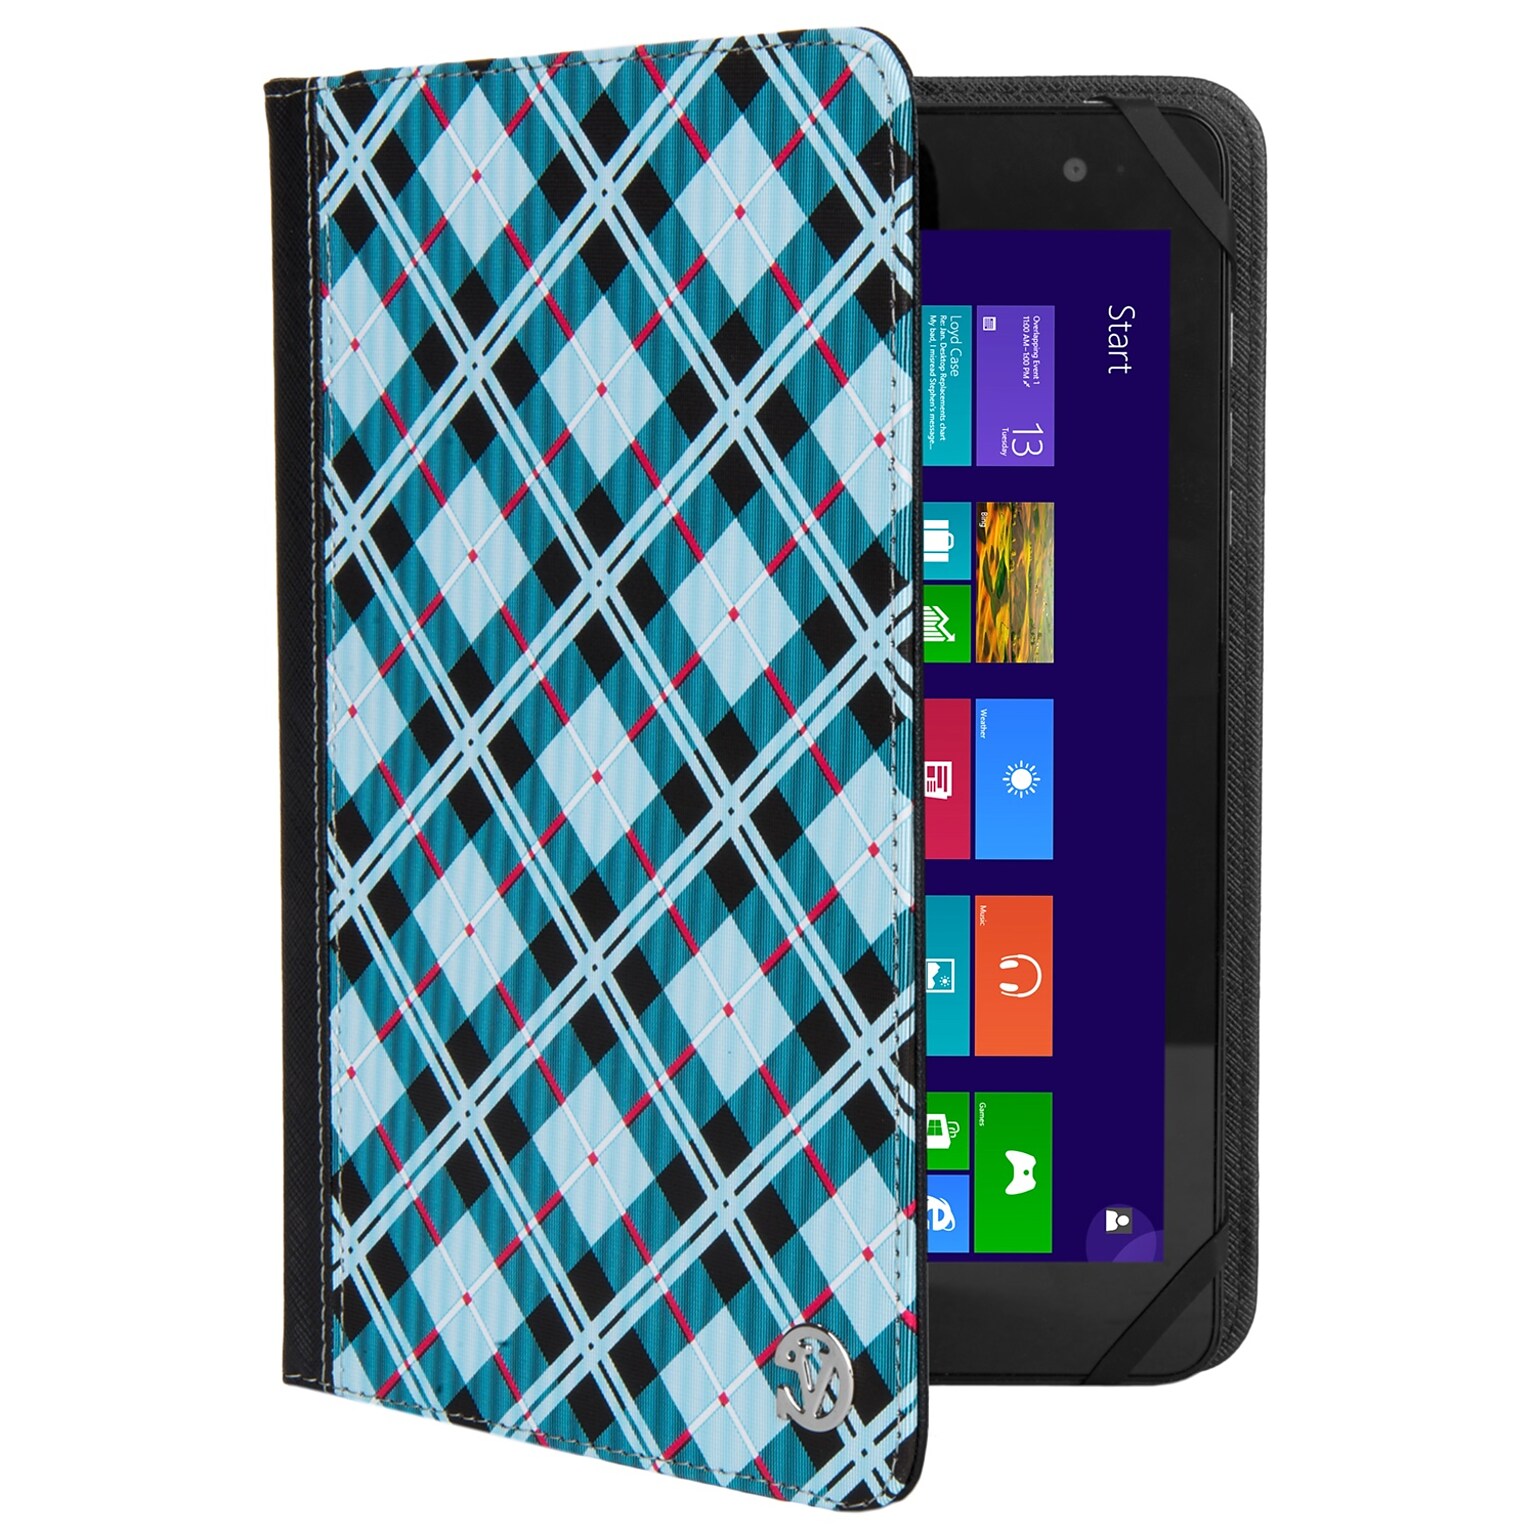 Vangoddy Universal Tablet Case for iPad Pro 10.5 Inch, Blue Checker